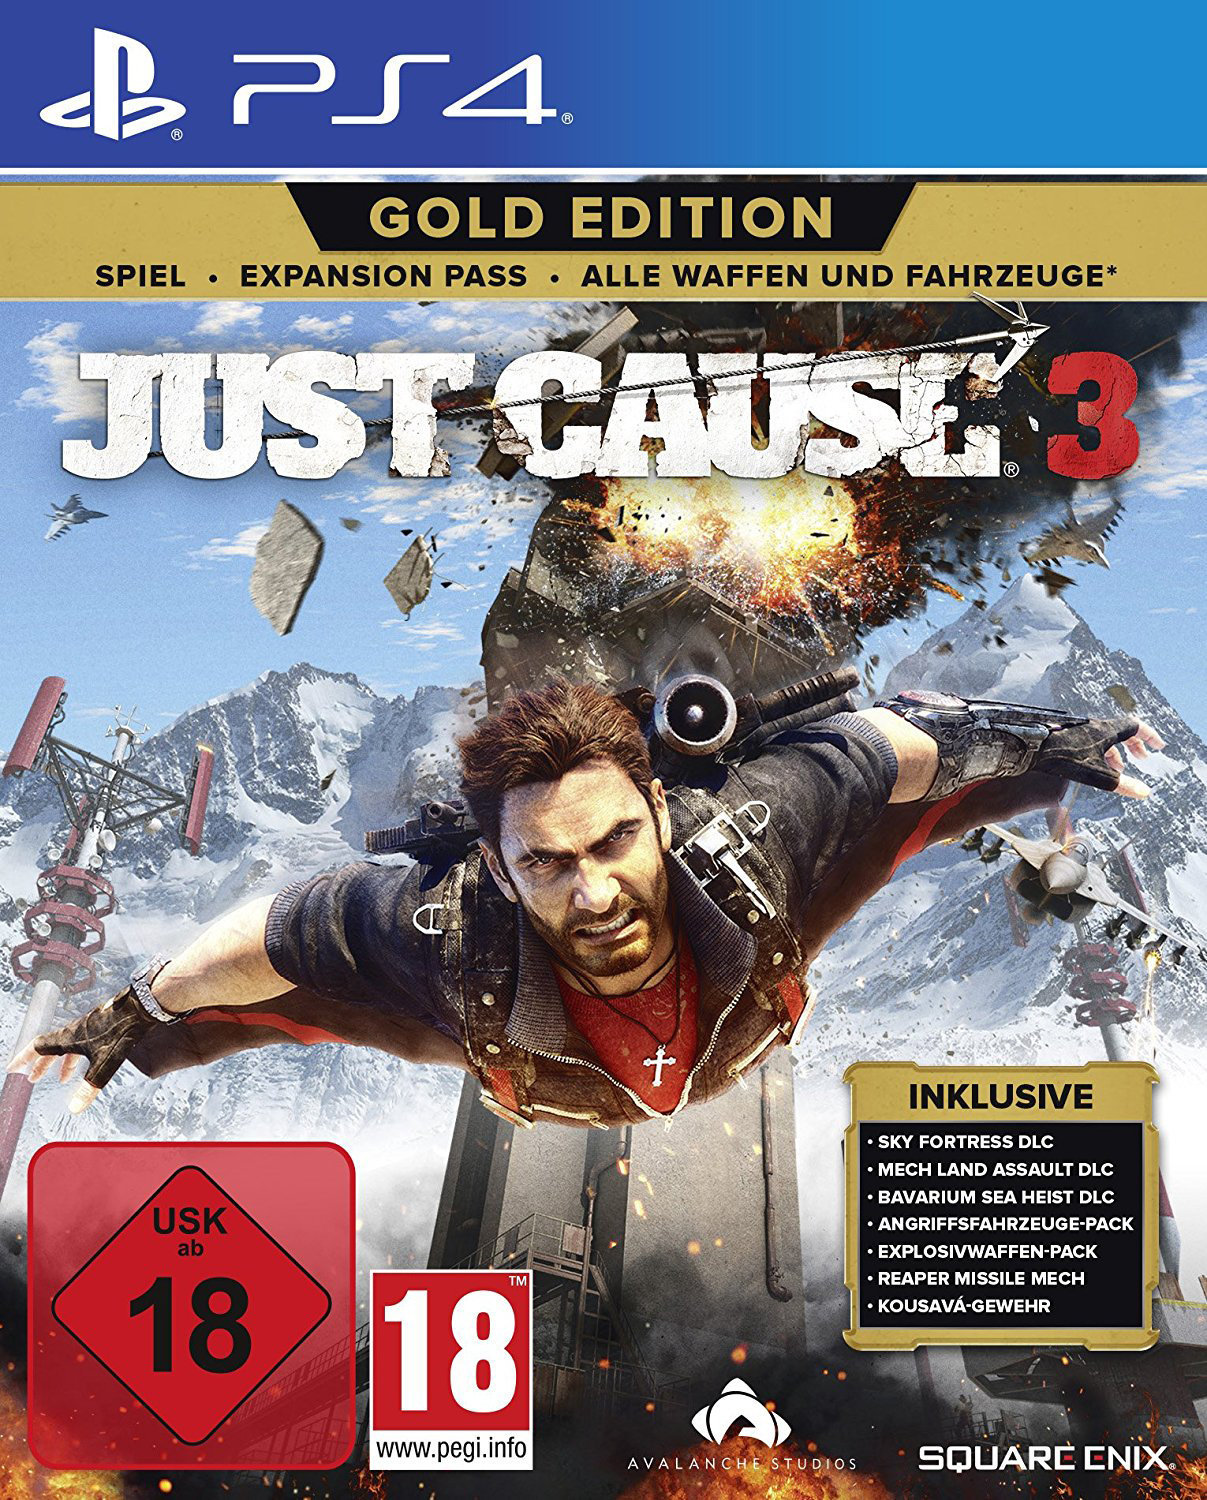 Edition Cause [PlayStation Just 3 4] - Gold -